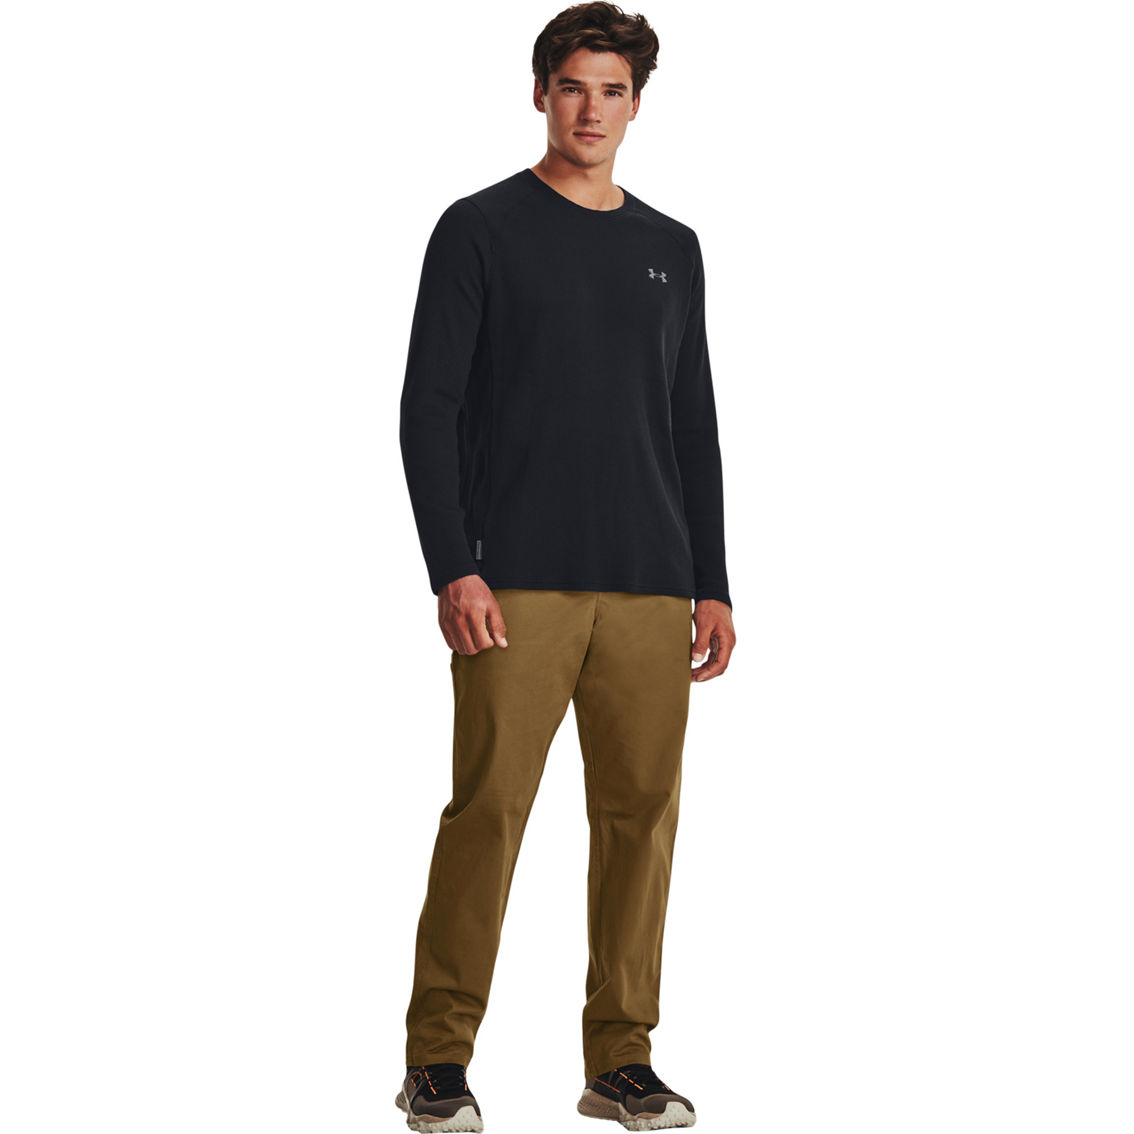 Under Armour Waffle Knit Max Crew Sweater - Image 3 of 6